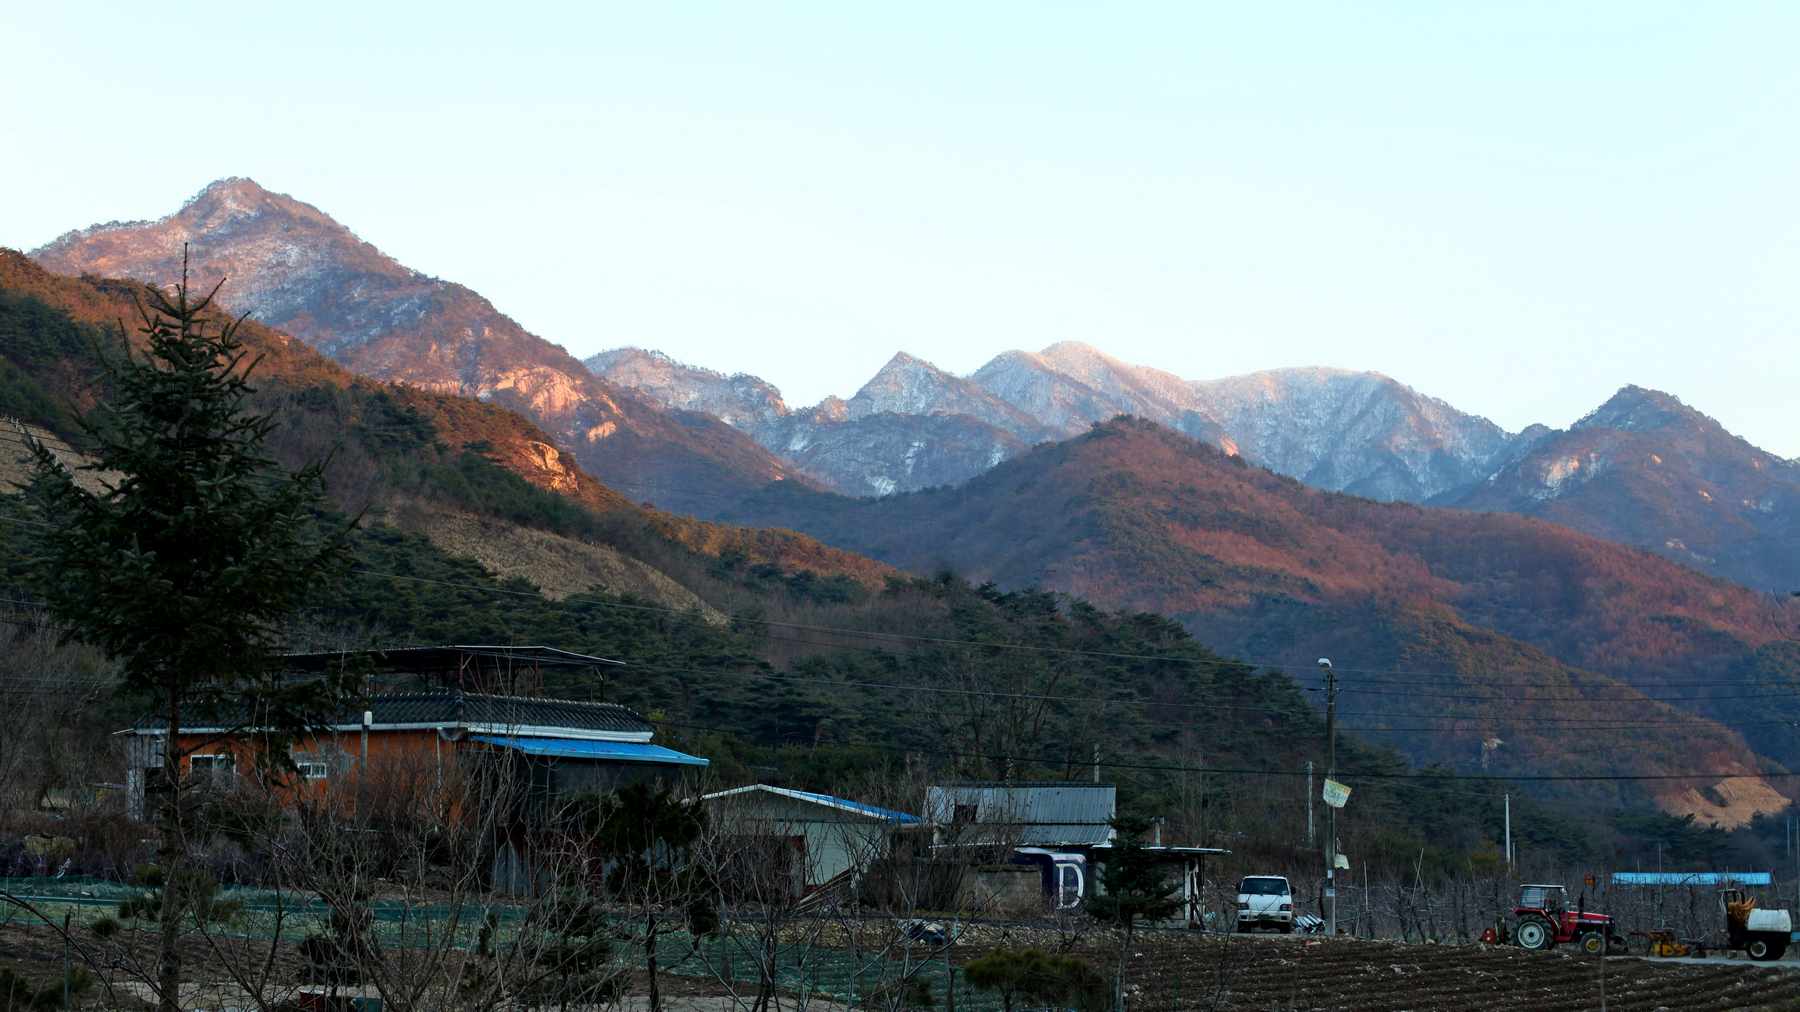 A picture of Joryeong (조령산) and Juheul (주흘산) Mountains near the Yeonpung Village along the Saejae Bike Path in Goesan County, South Korea.